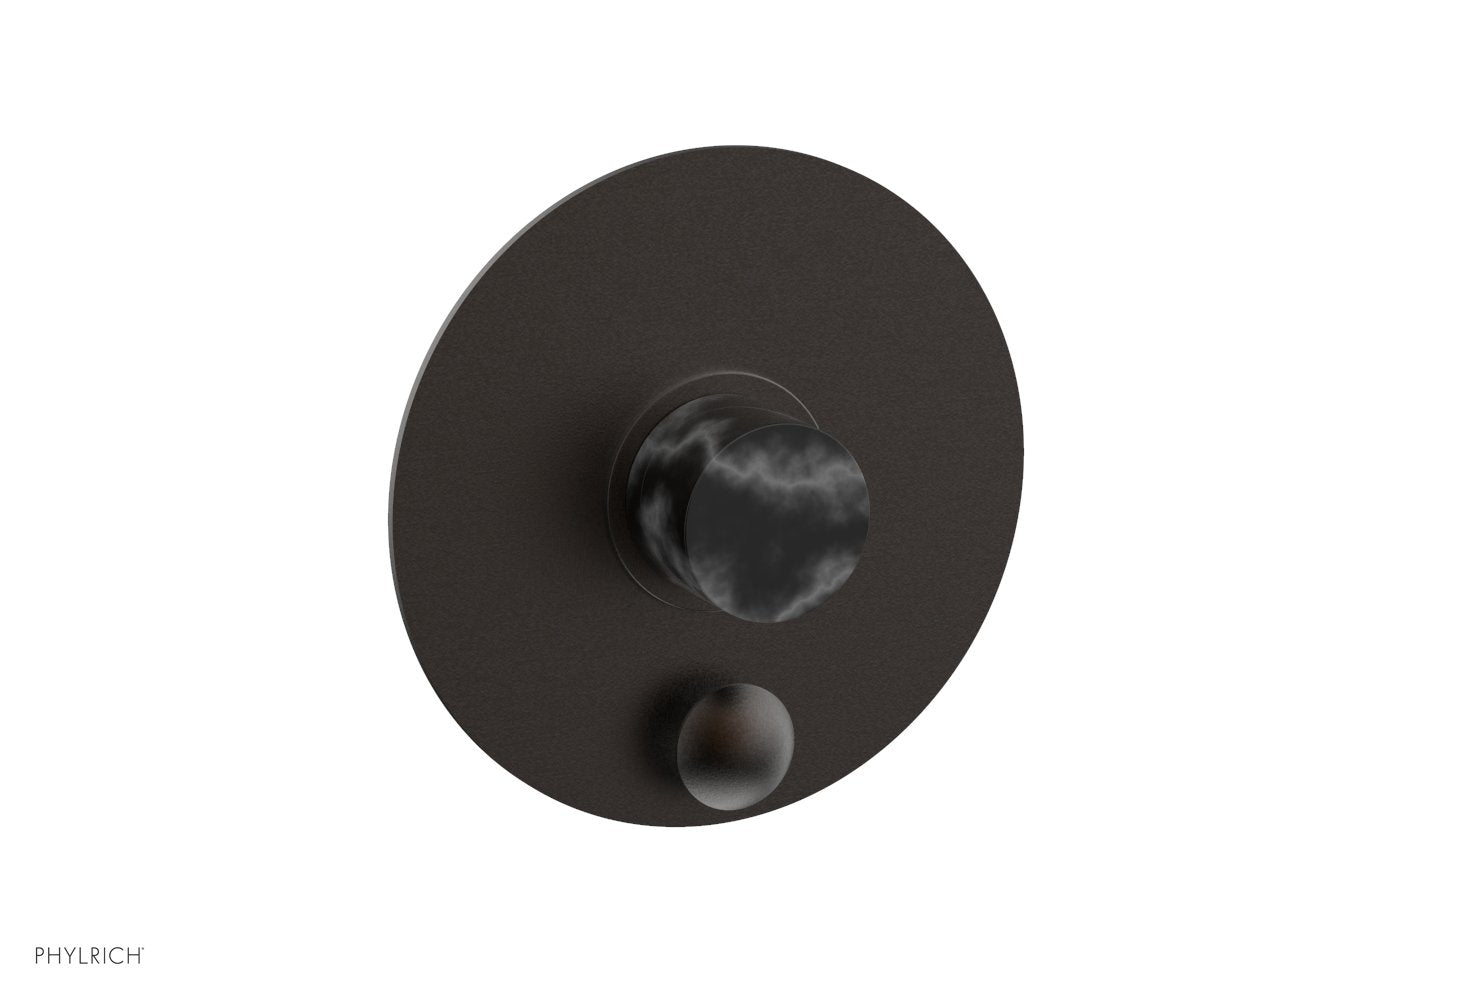 Phylrich BASIC II Pressure Balance Shower Plate with Diverter and Handle Trim Set - Black Marble